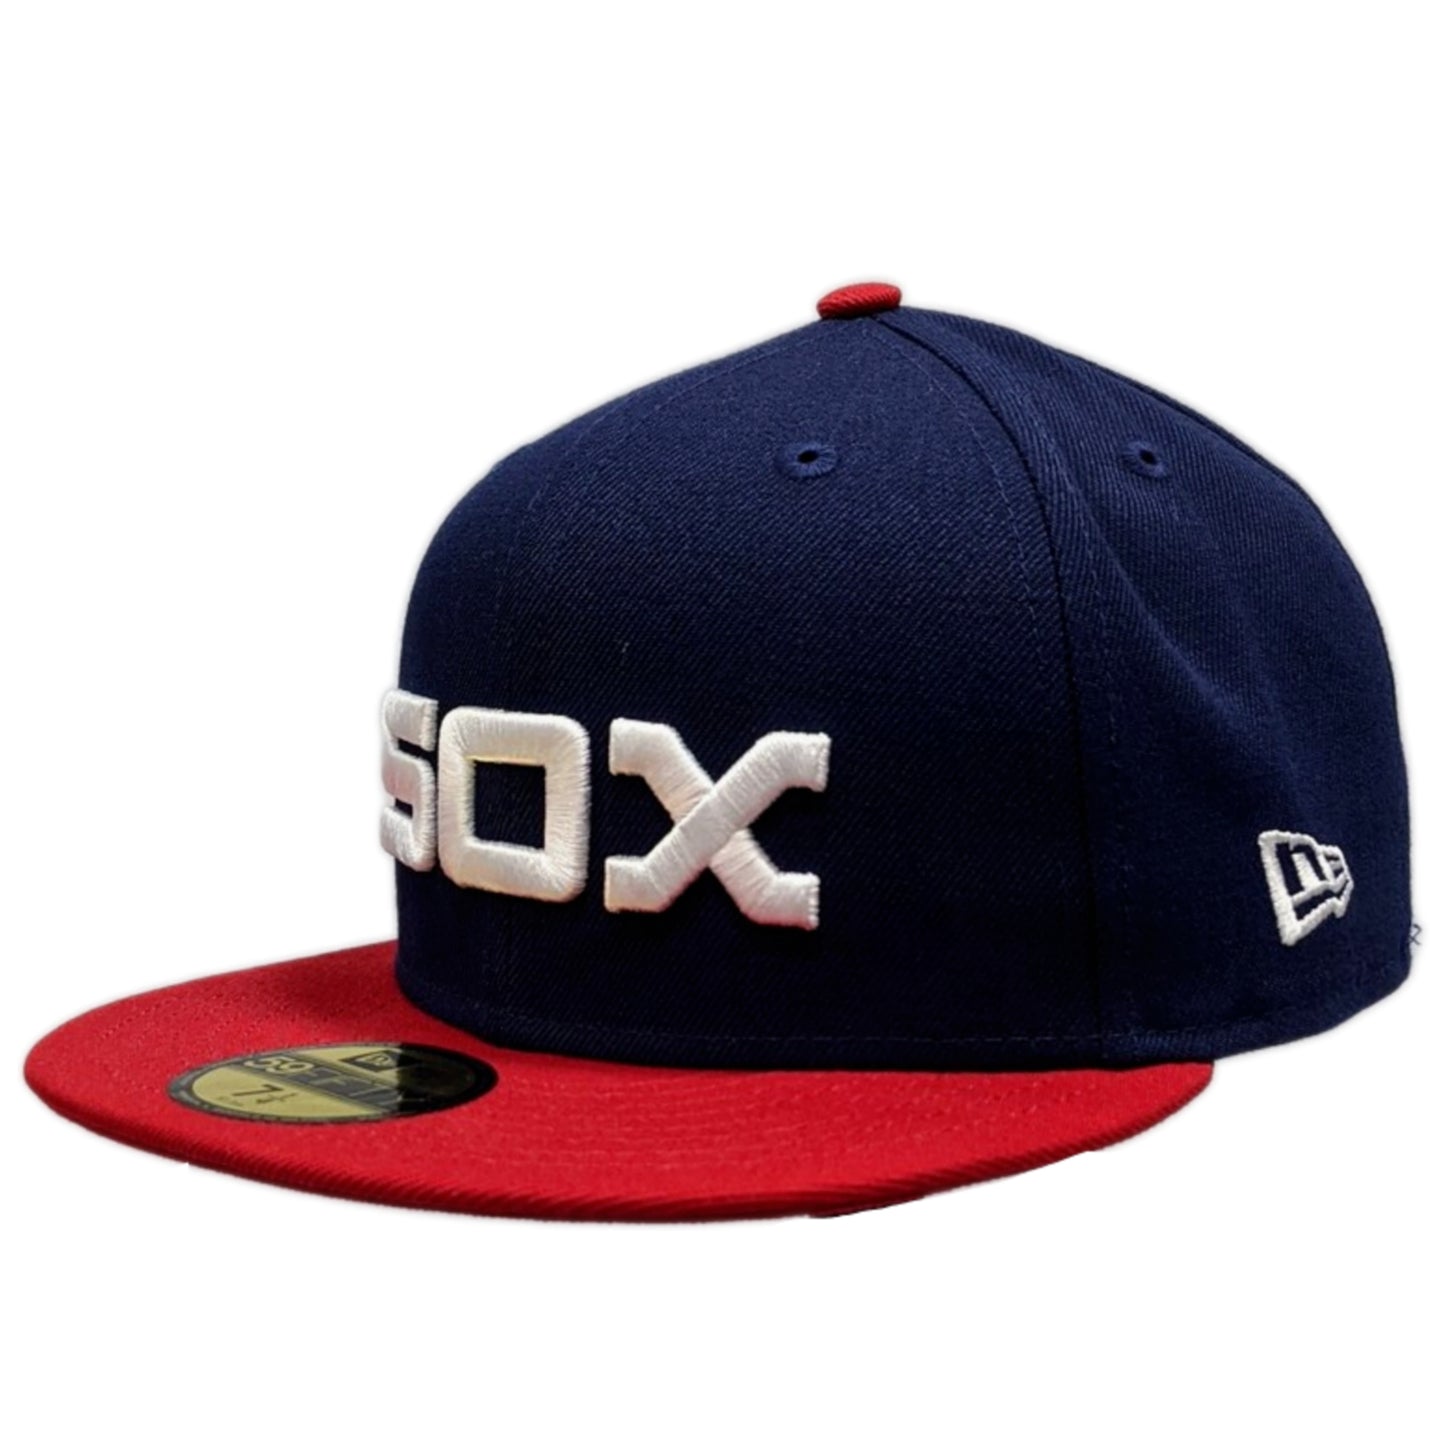 Chicago White Sox Cooperstown Collection 1983 Road 75 Years Side Patch Navy & Red New Era 59FIFTY Fitted Hat